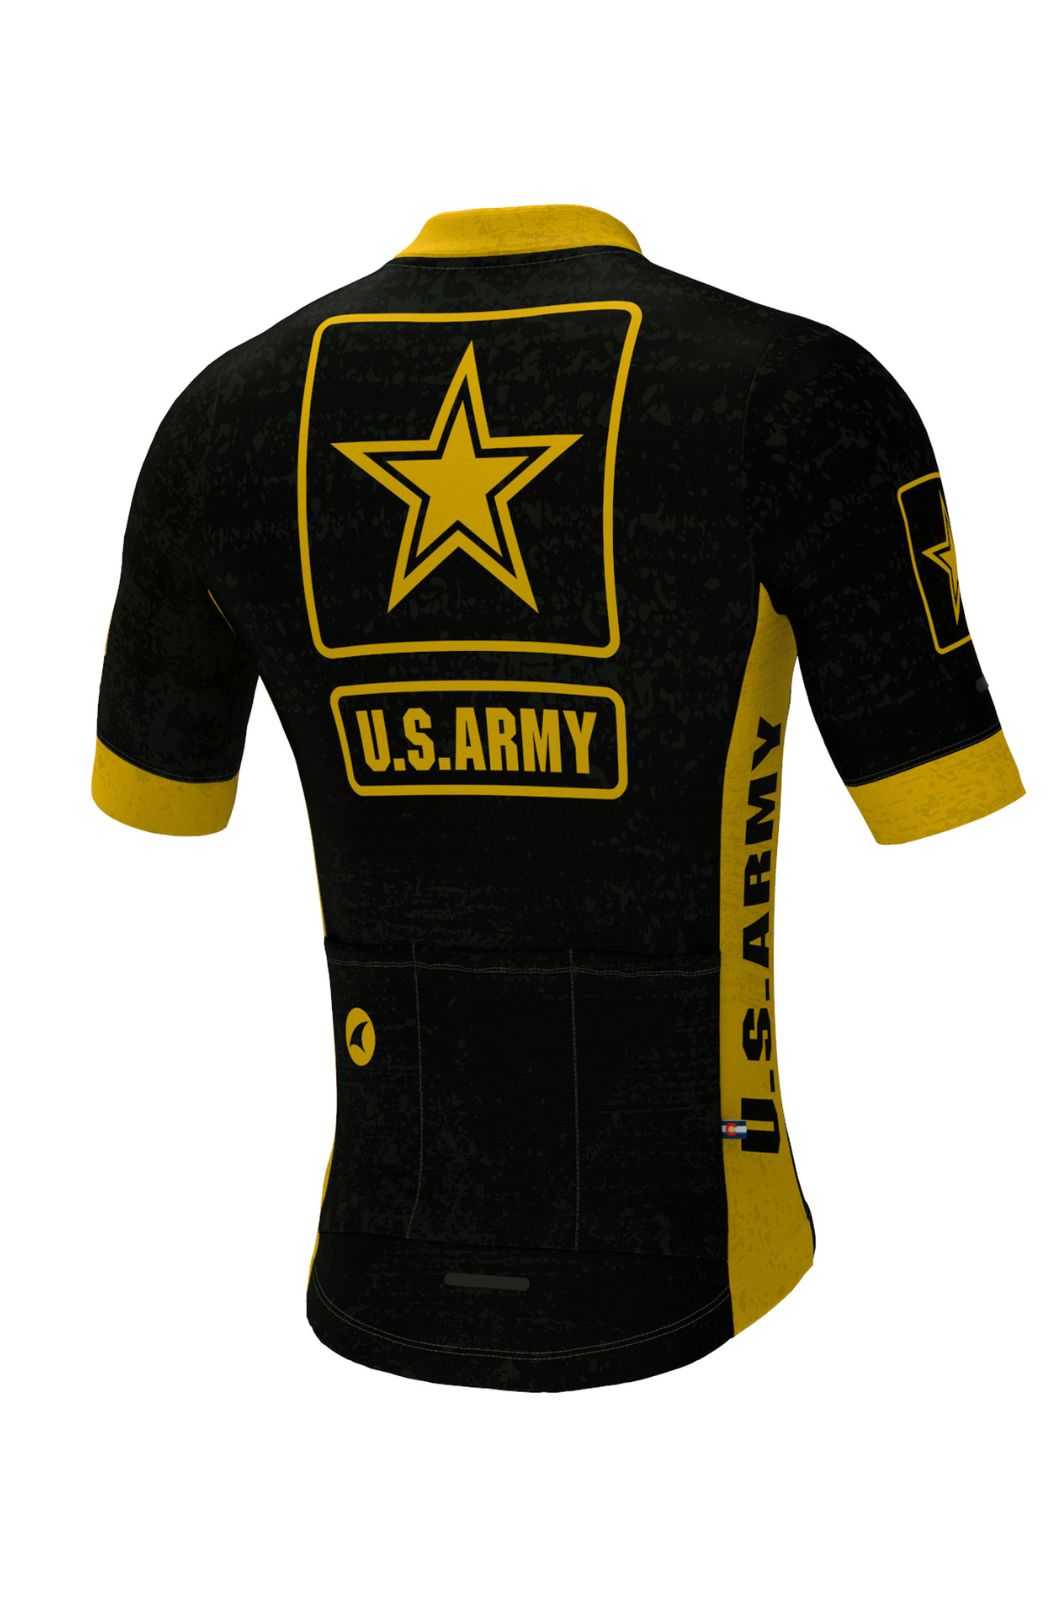 Men's US Army Cycling Jersey - Ascent Aero Back View